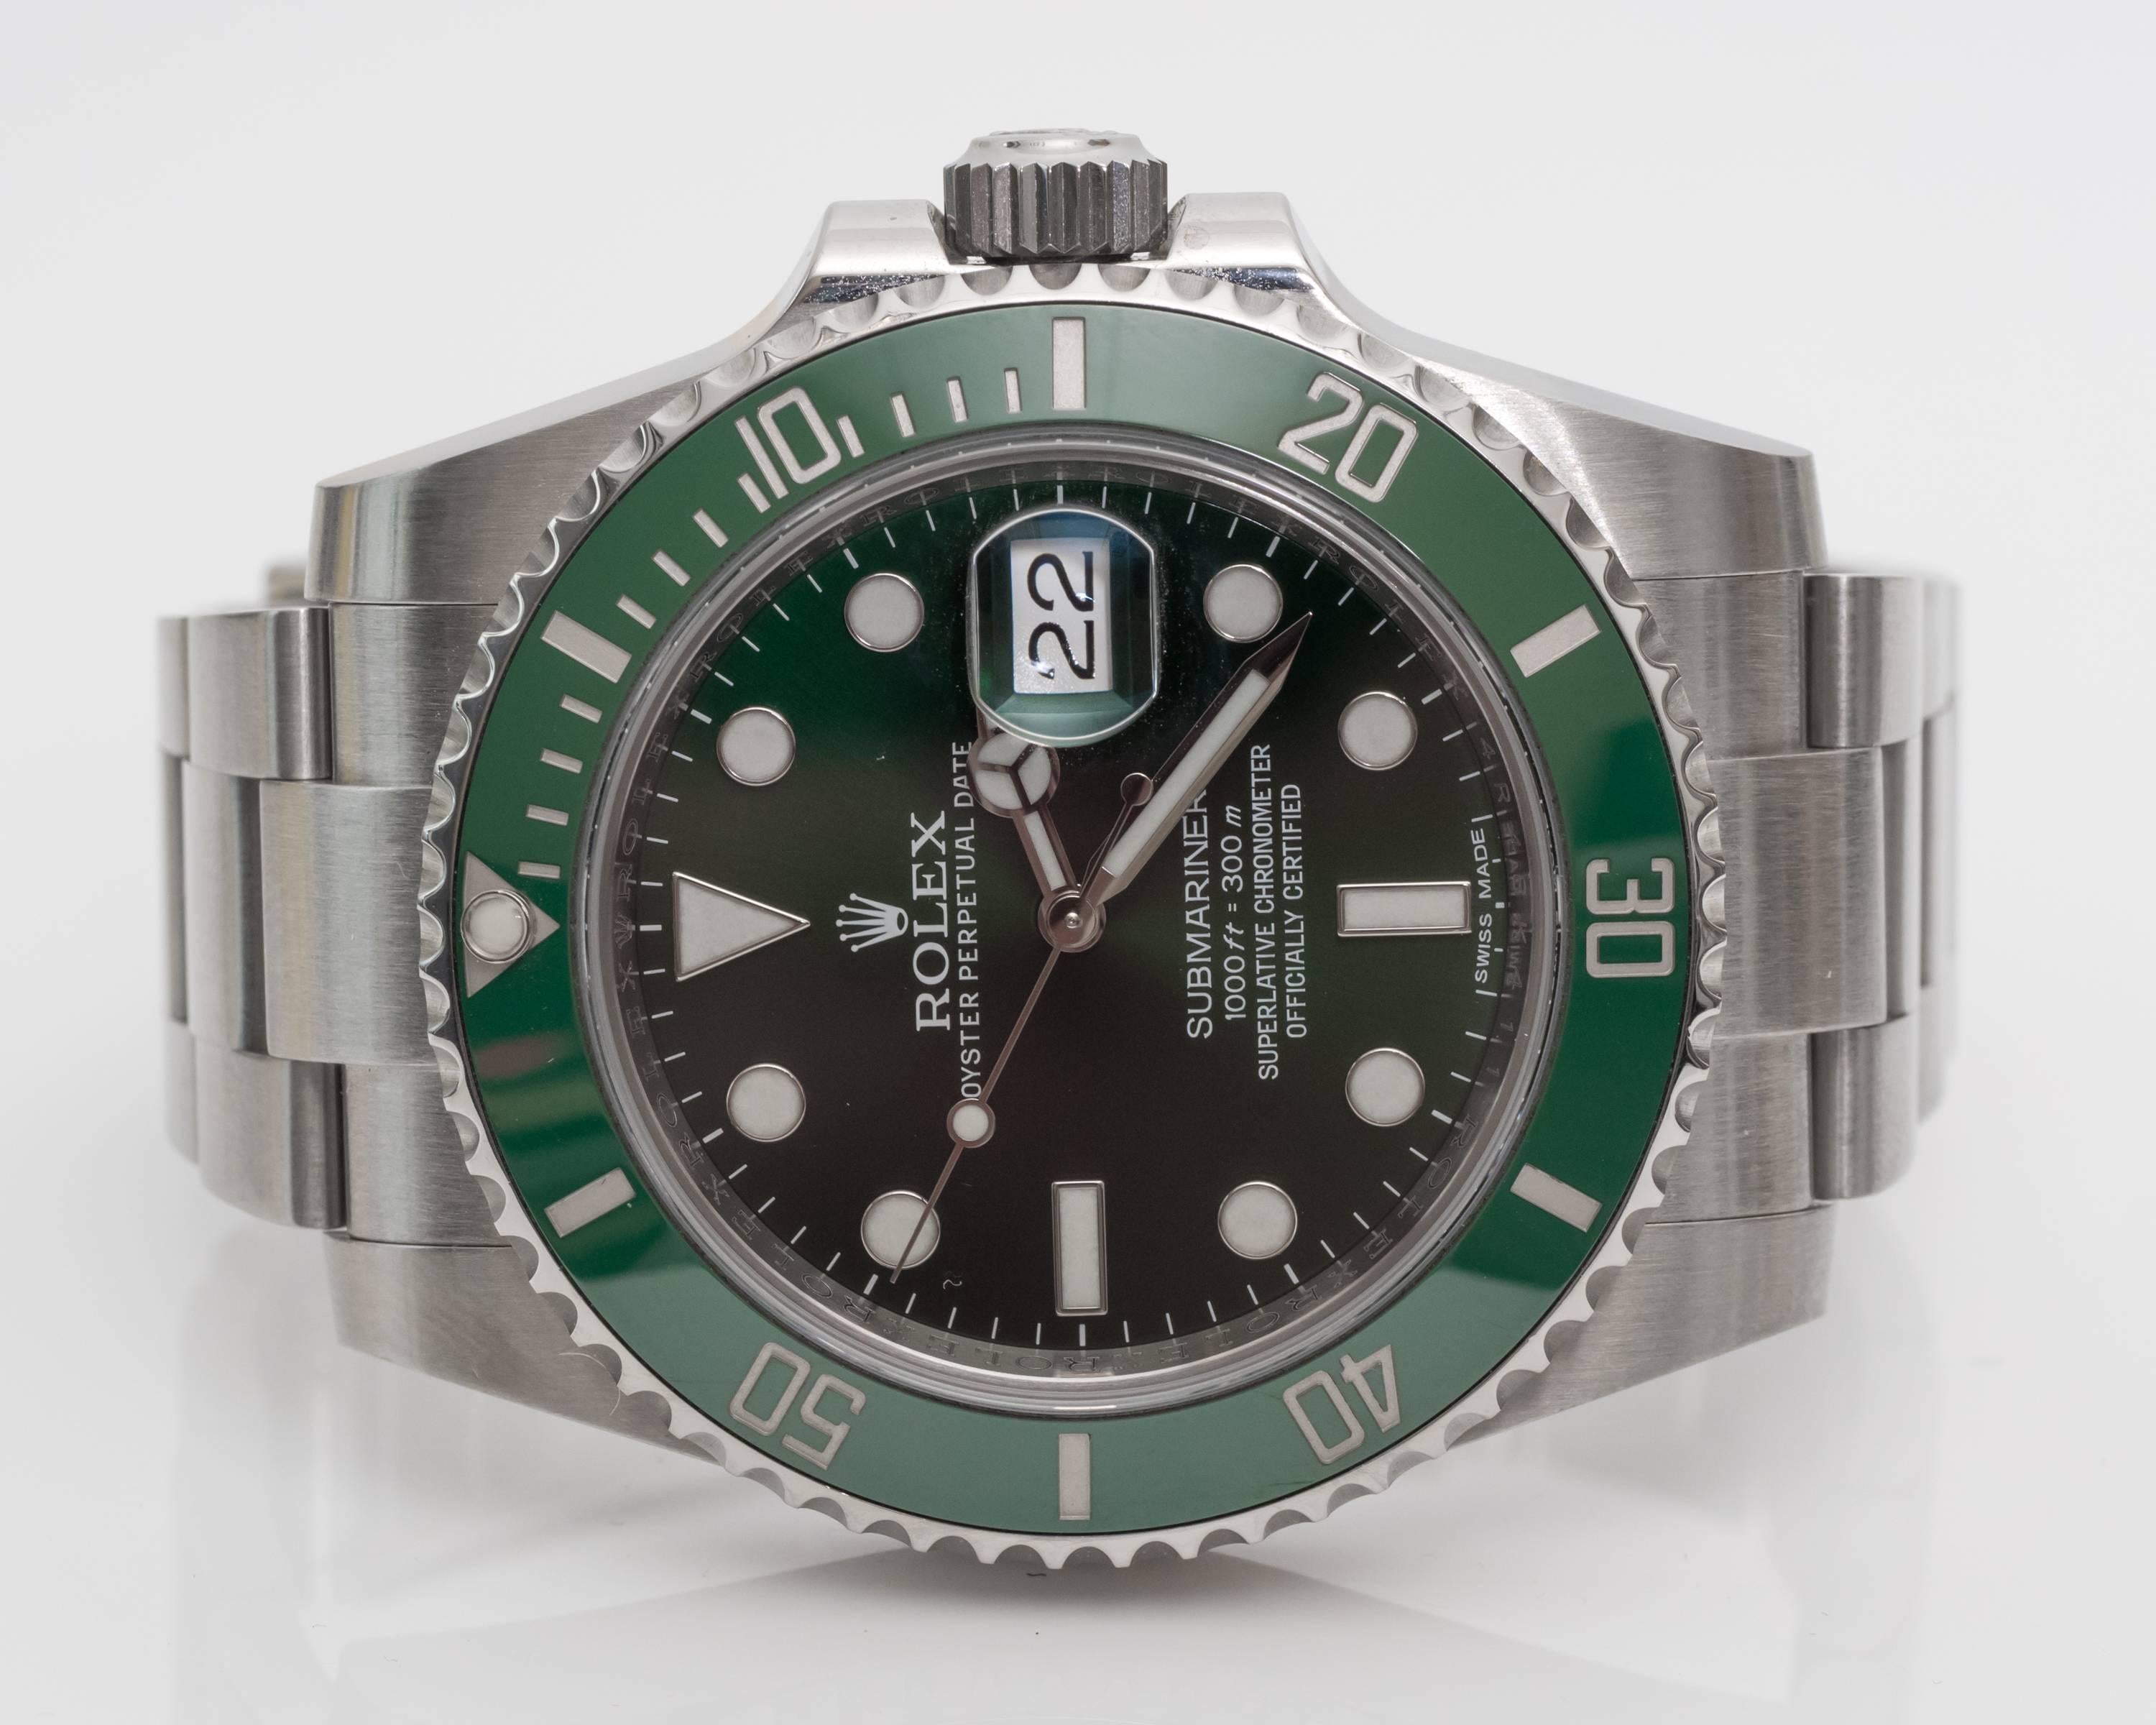 Classic Rolex Submariner, often recognized as "The Rolex Hulk Submariner" 
Face of the watch is a deep green color with white markers and hour hands

Hallmark "Rolex Oyster Perpetual Date Subamariner 1000ft = 300 m Superlative